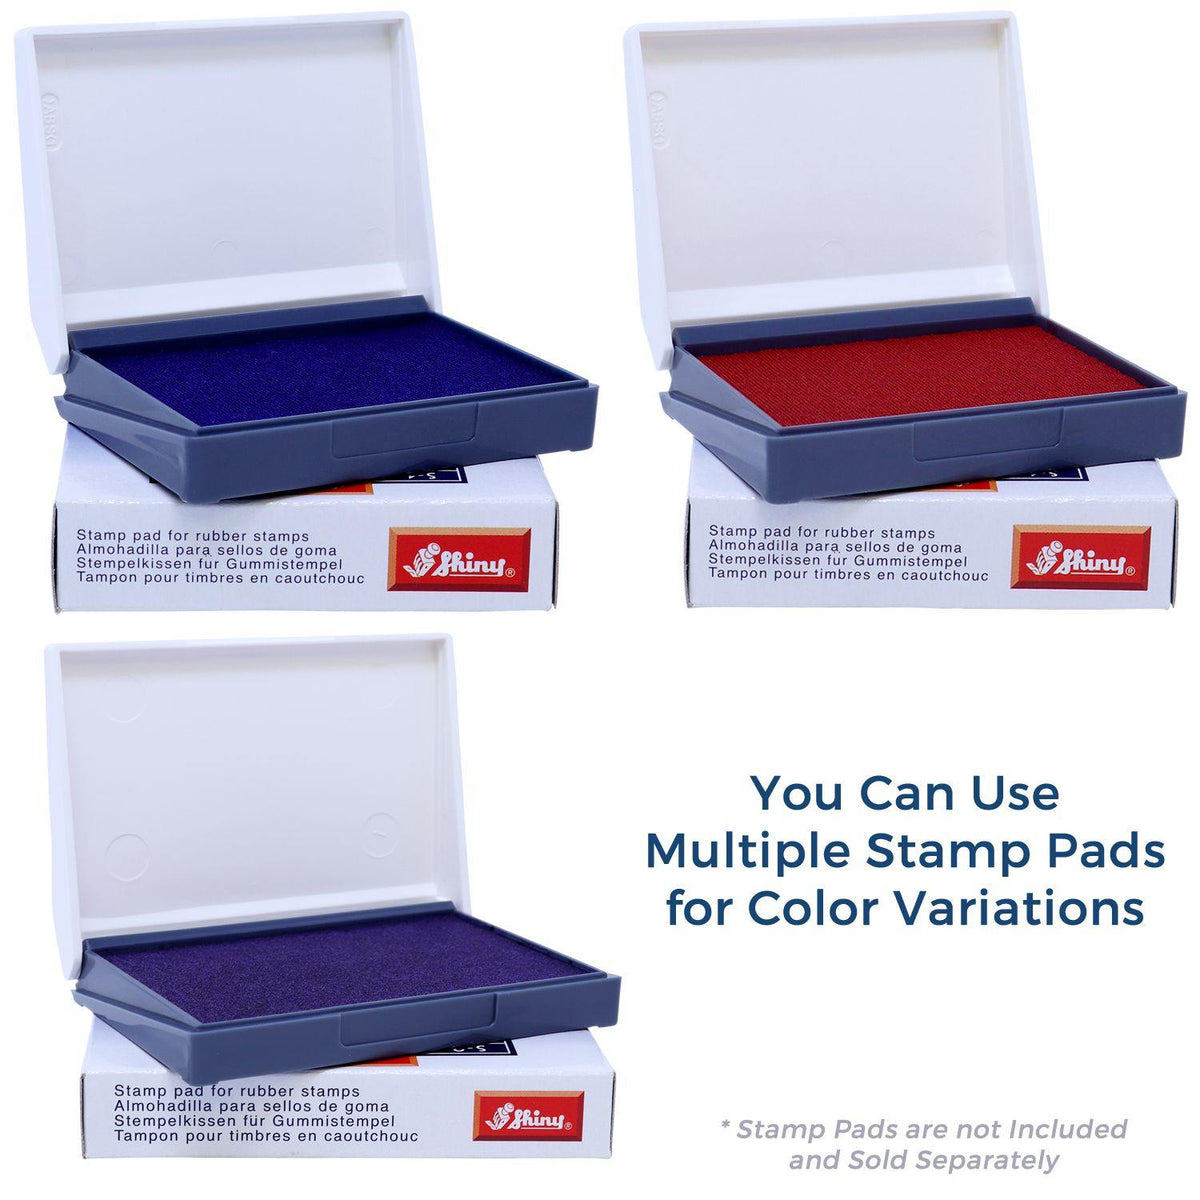 Stamp Pads for Large Ppo Rubber Stamp Available